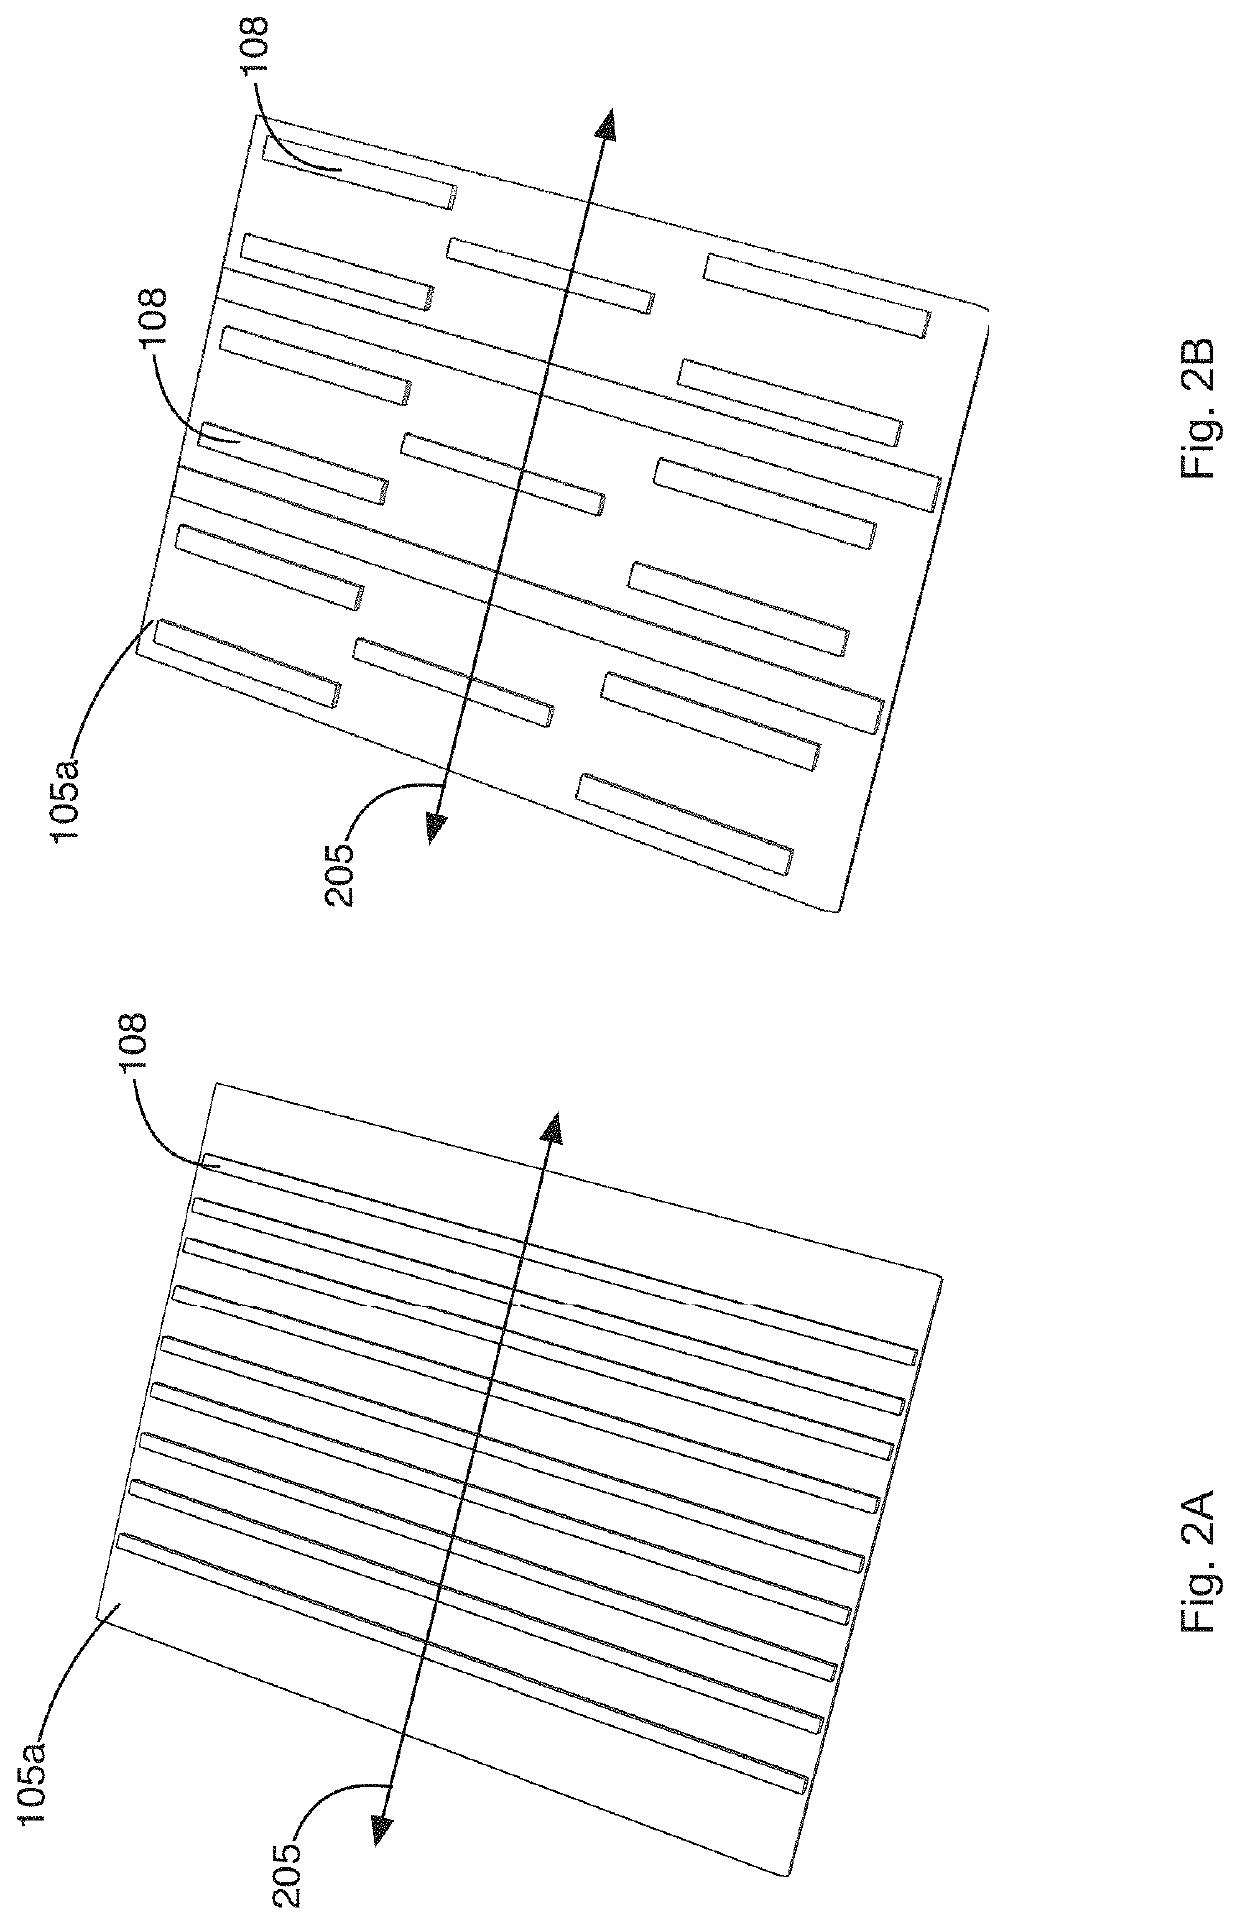 Assembly and method for sealing a bundle of wires